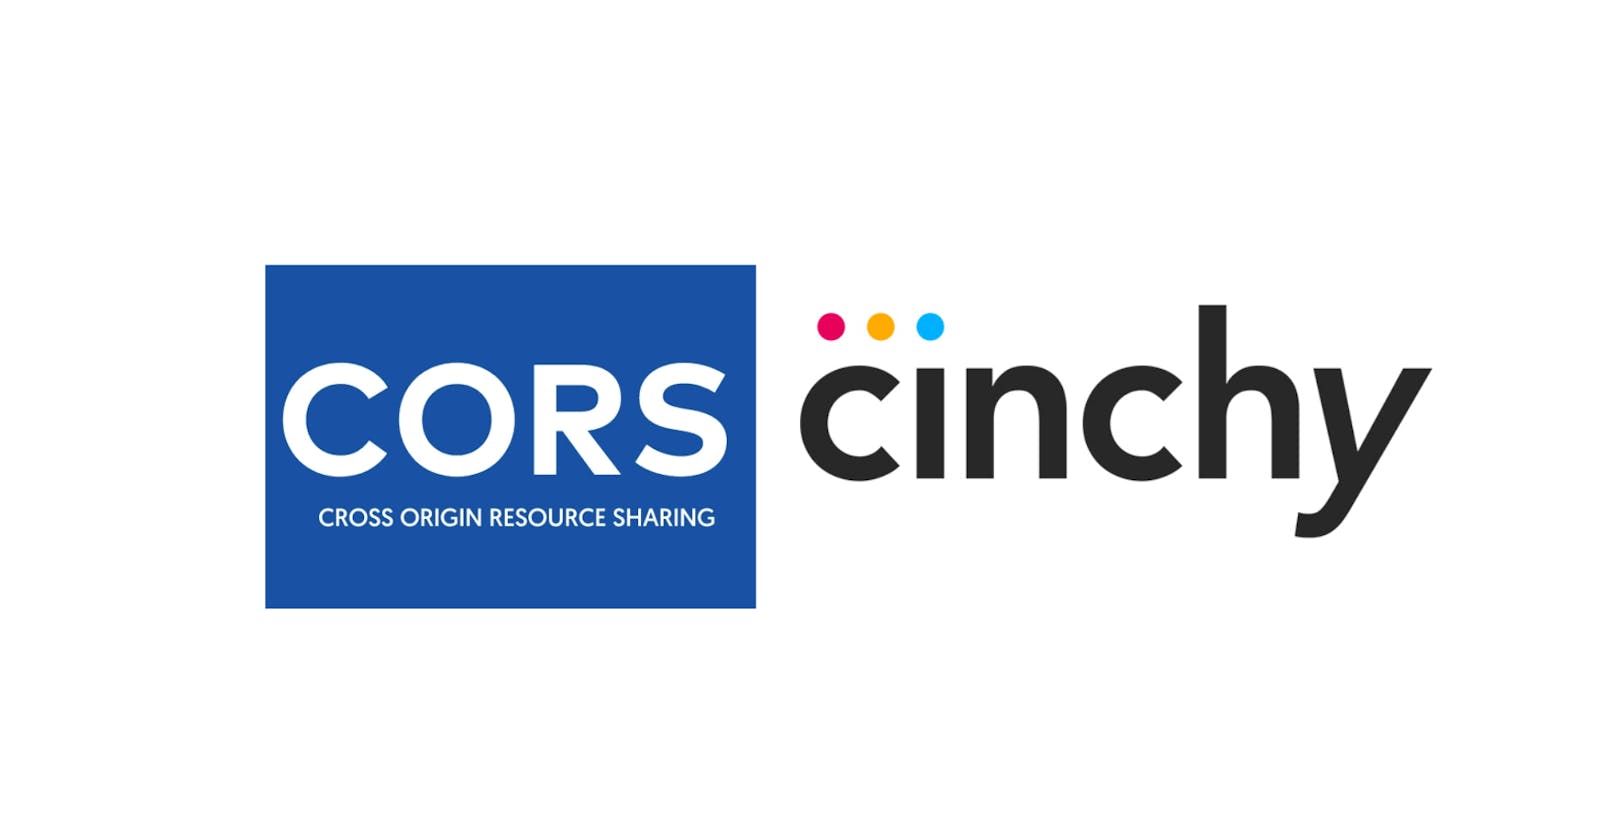 How to solve the CORS problem using Cinchy